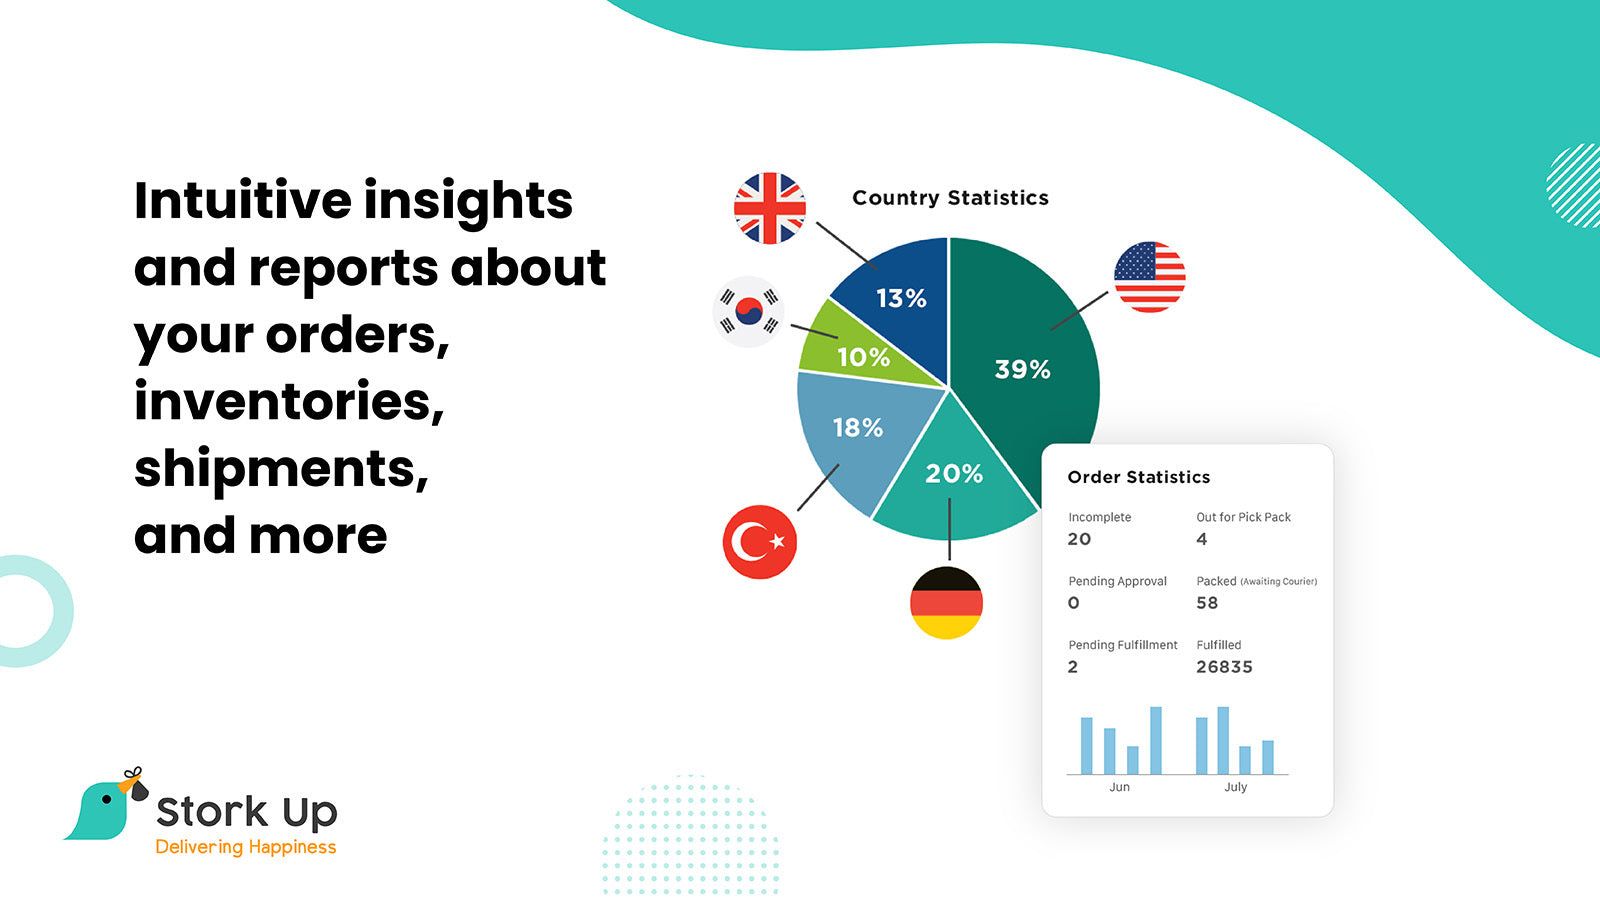 Intuitive insights and reports